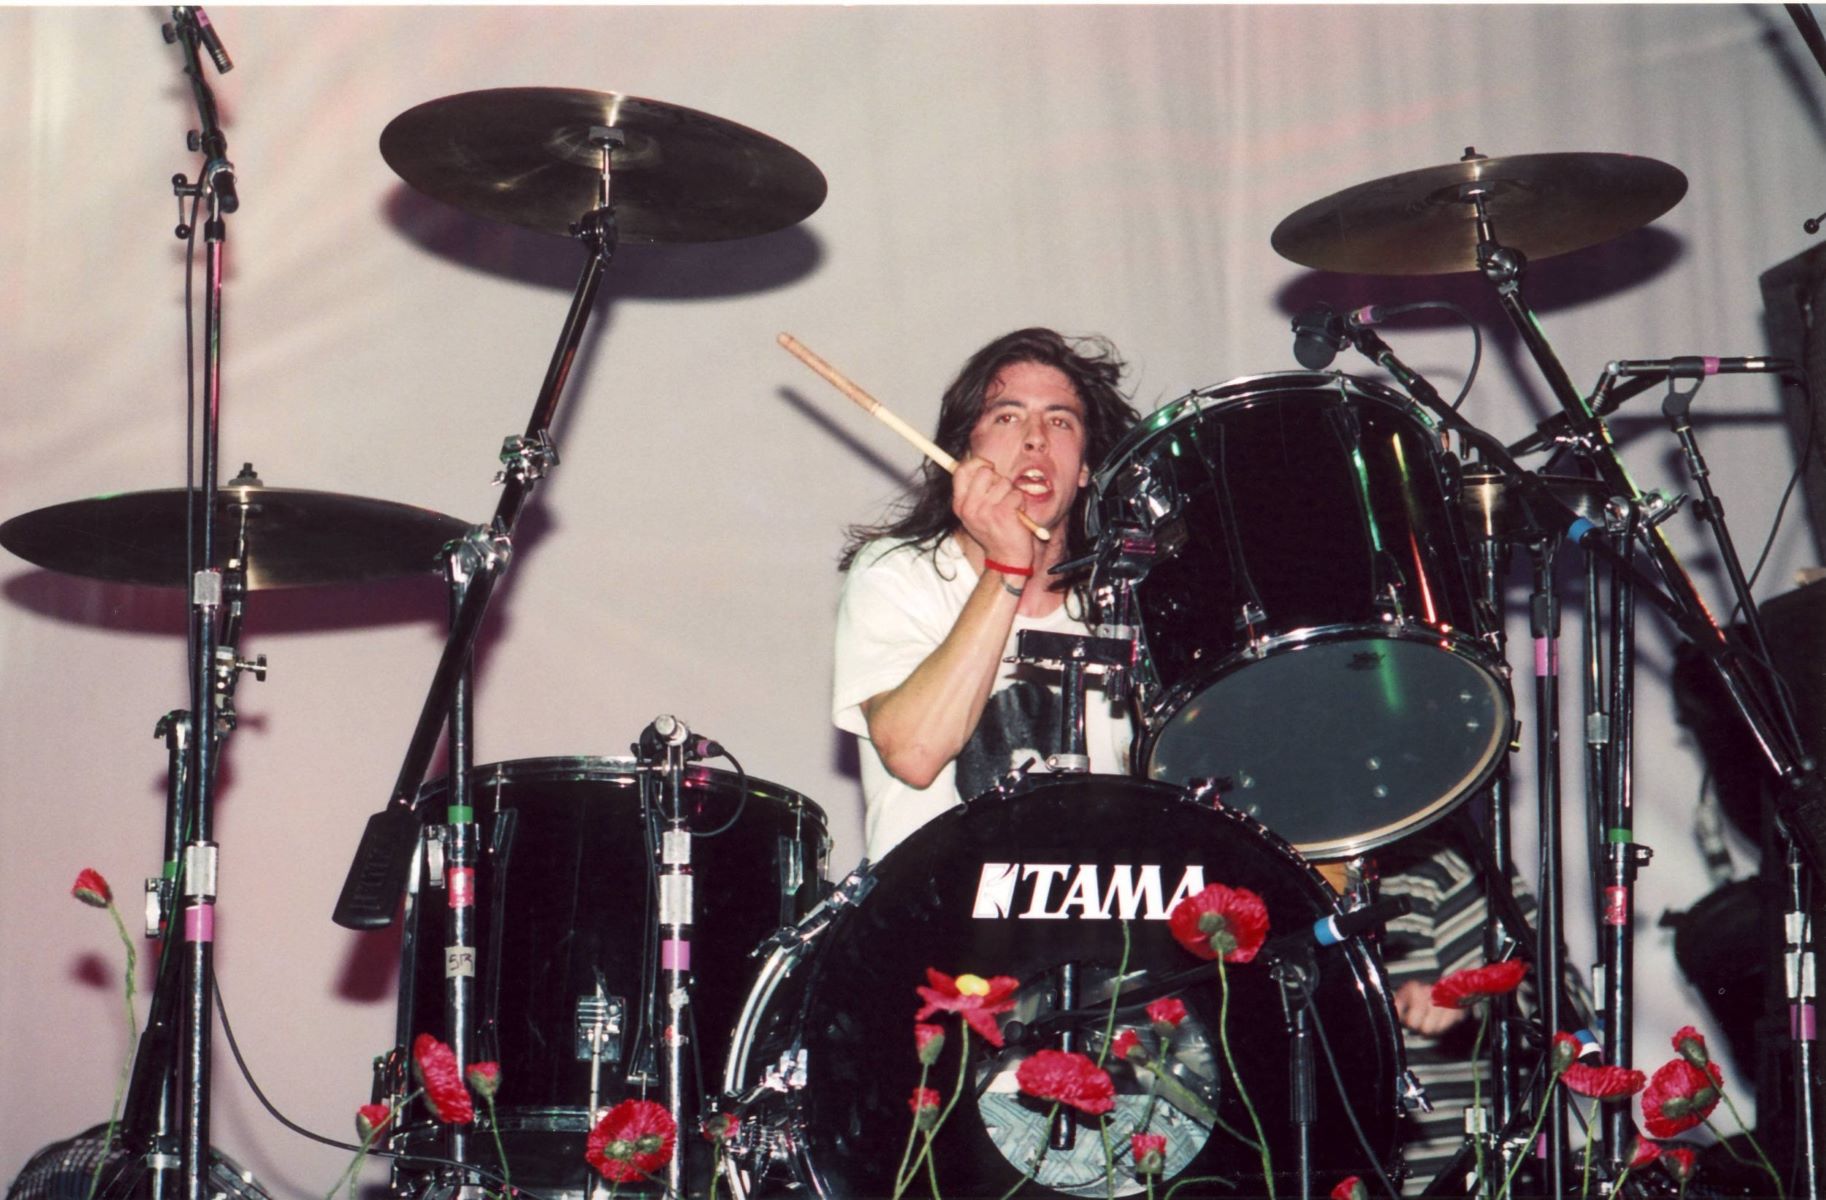 What Drums Did Dave Grohl Use